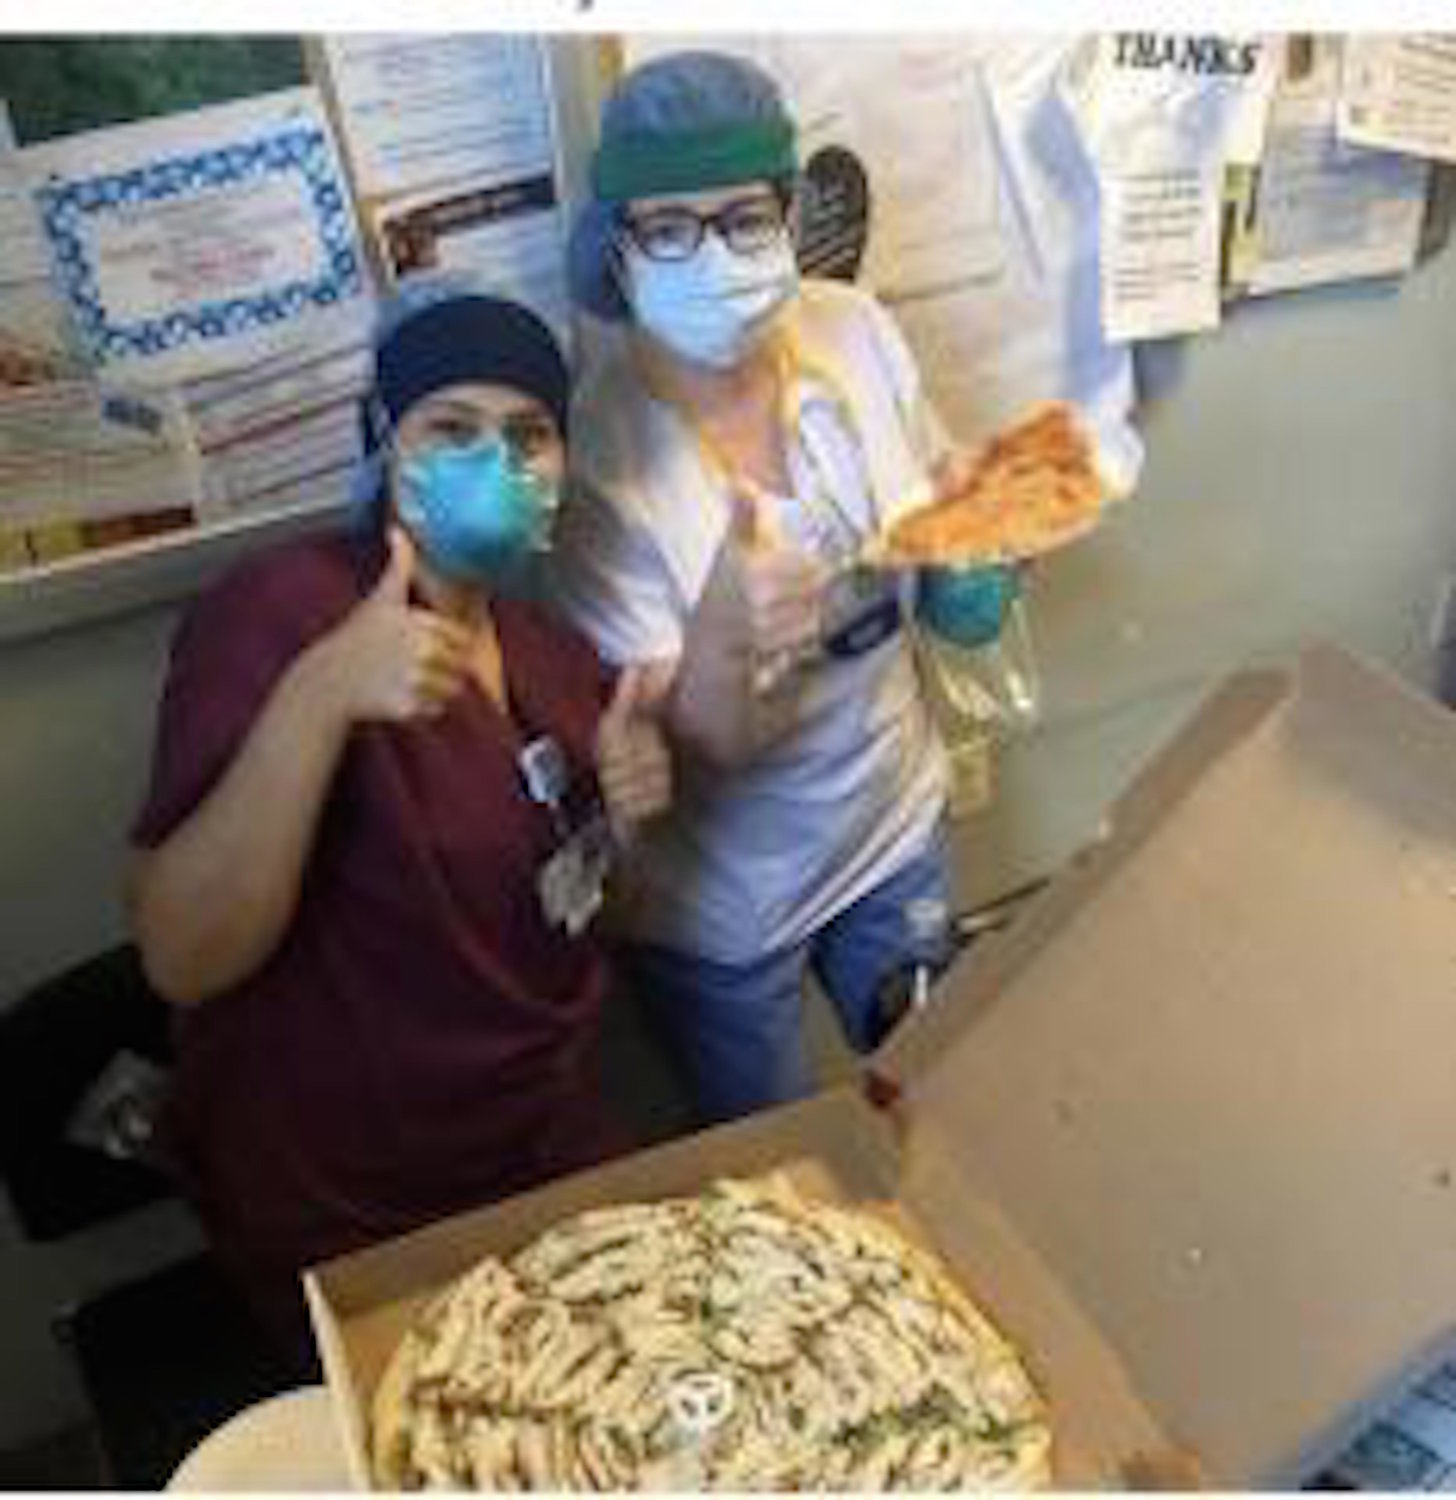 Health care workers at LIJ Valley Stream enjoyed pizza donated by the restaurant.